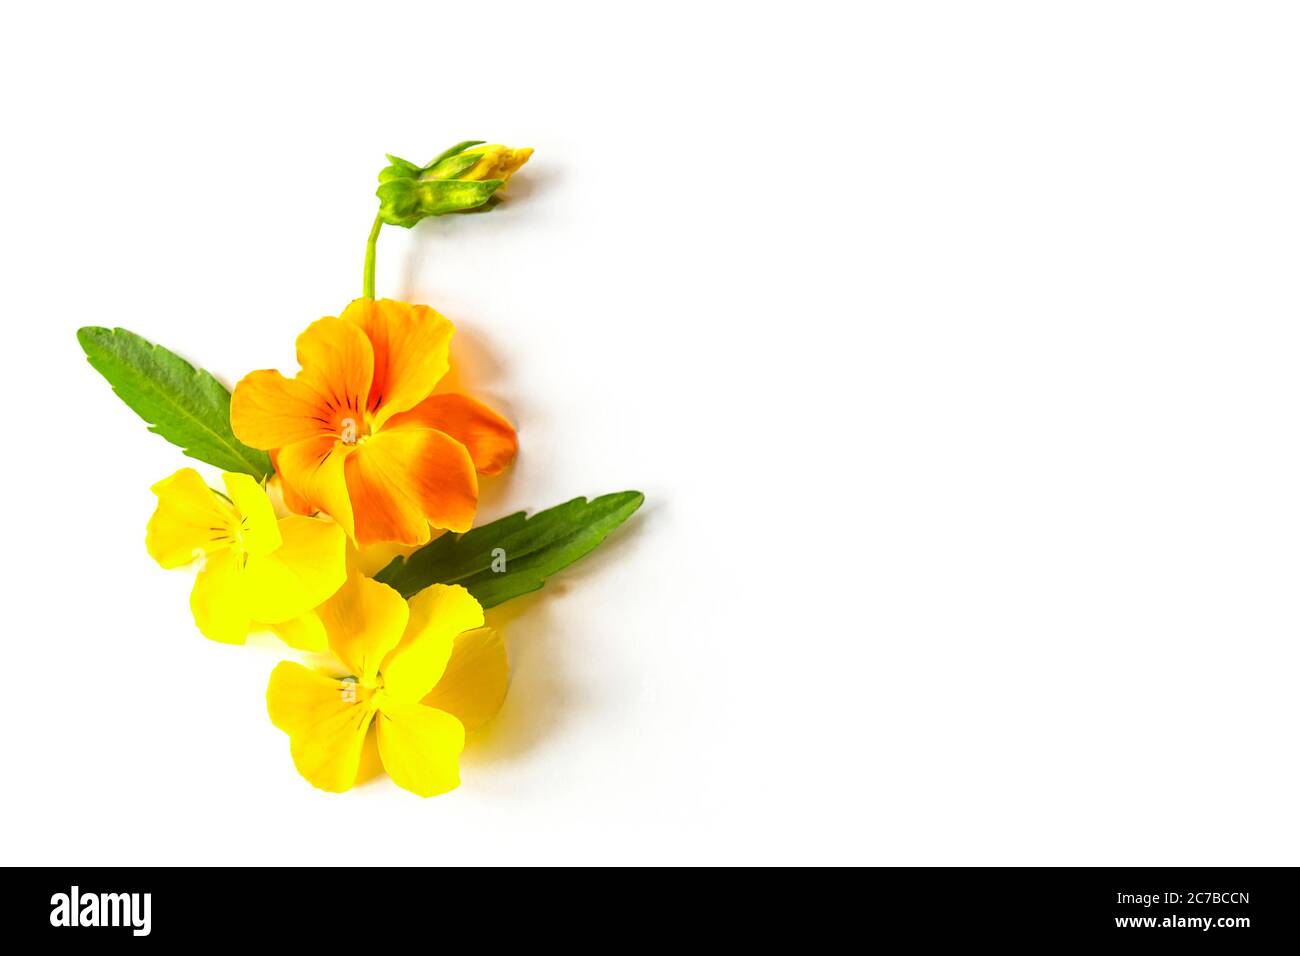 Floral arrancement of blooming yellow pansy flowers with leaves and buds on white bckground with copy space Stock Photo